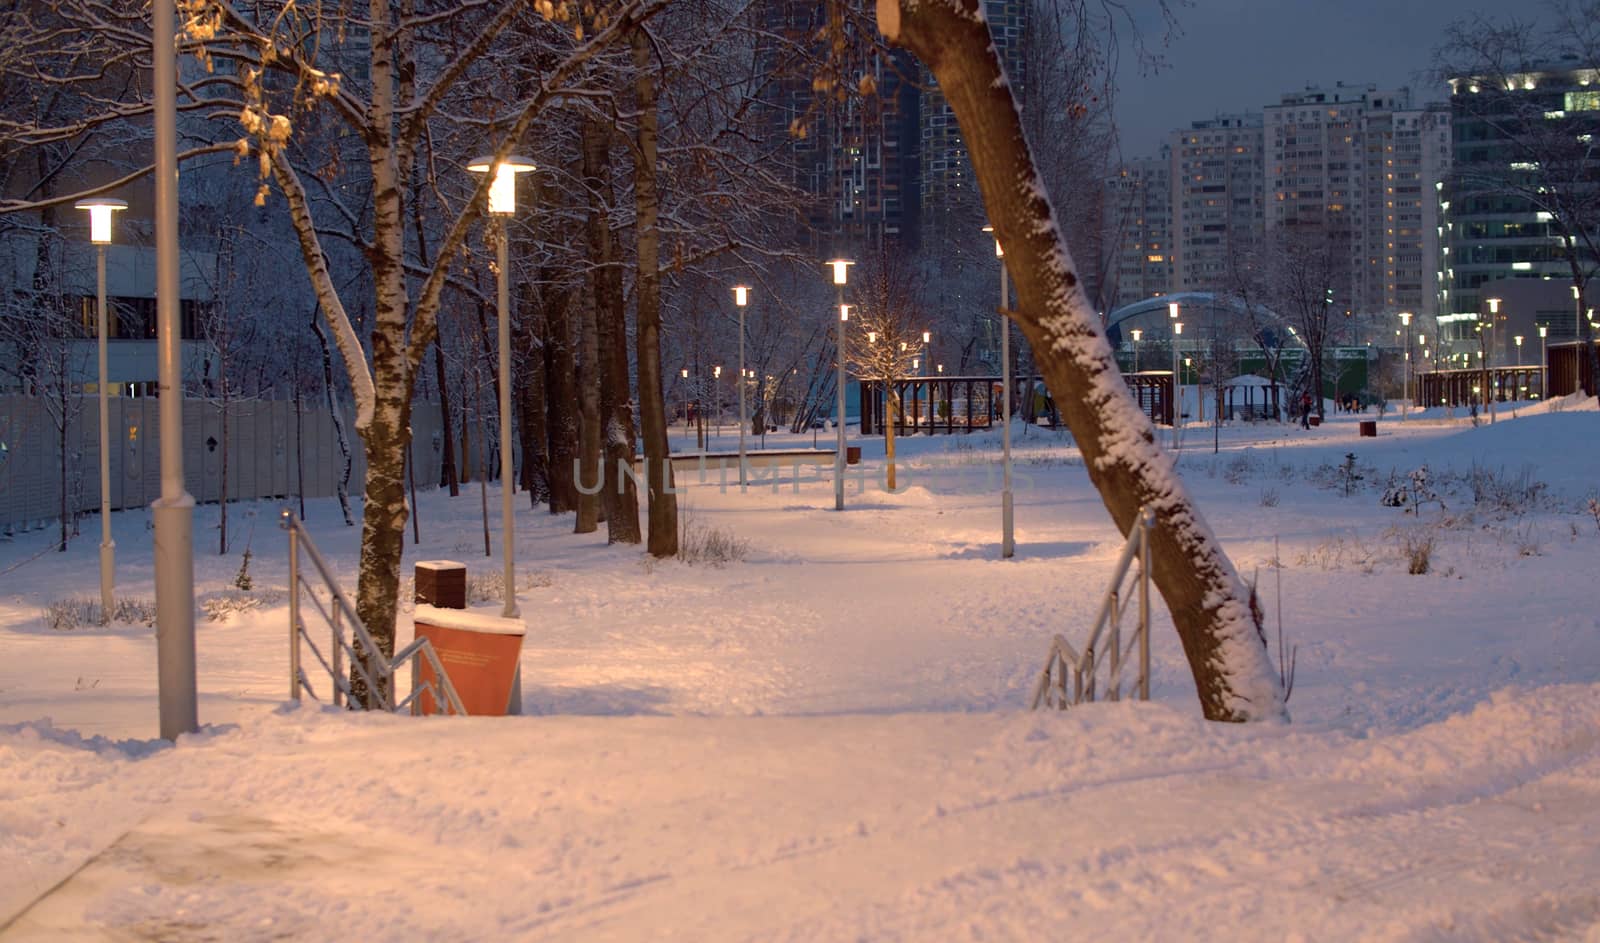 Snow covered city park in the evening. Light of lanterns, luminous windows in the houses. Winter cityscape.